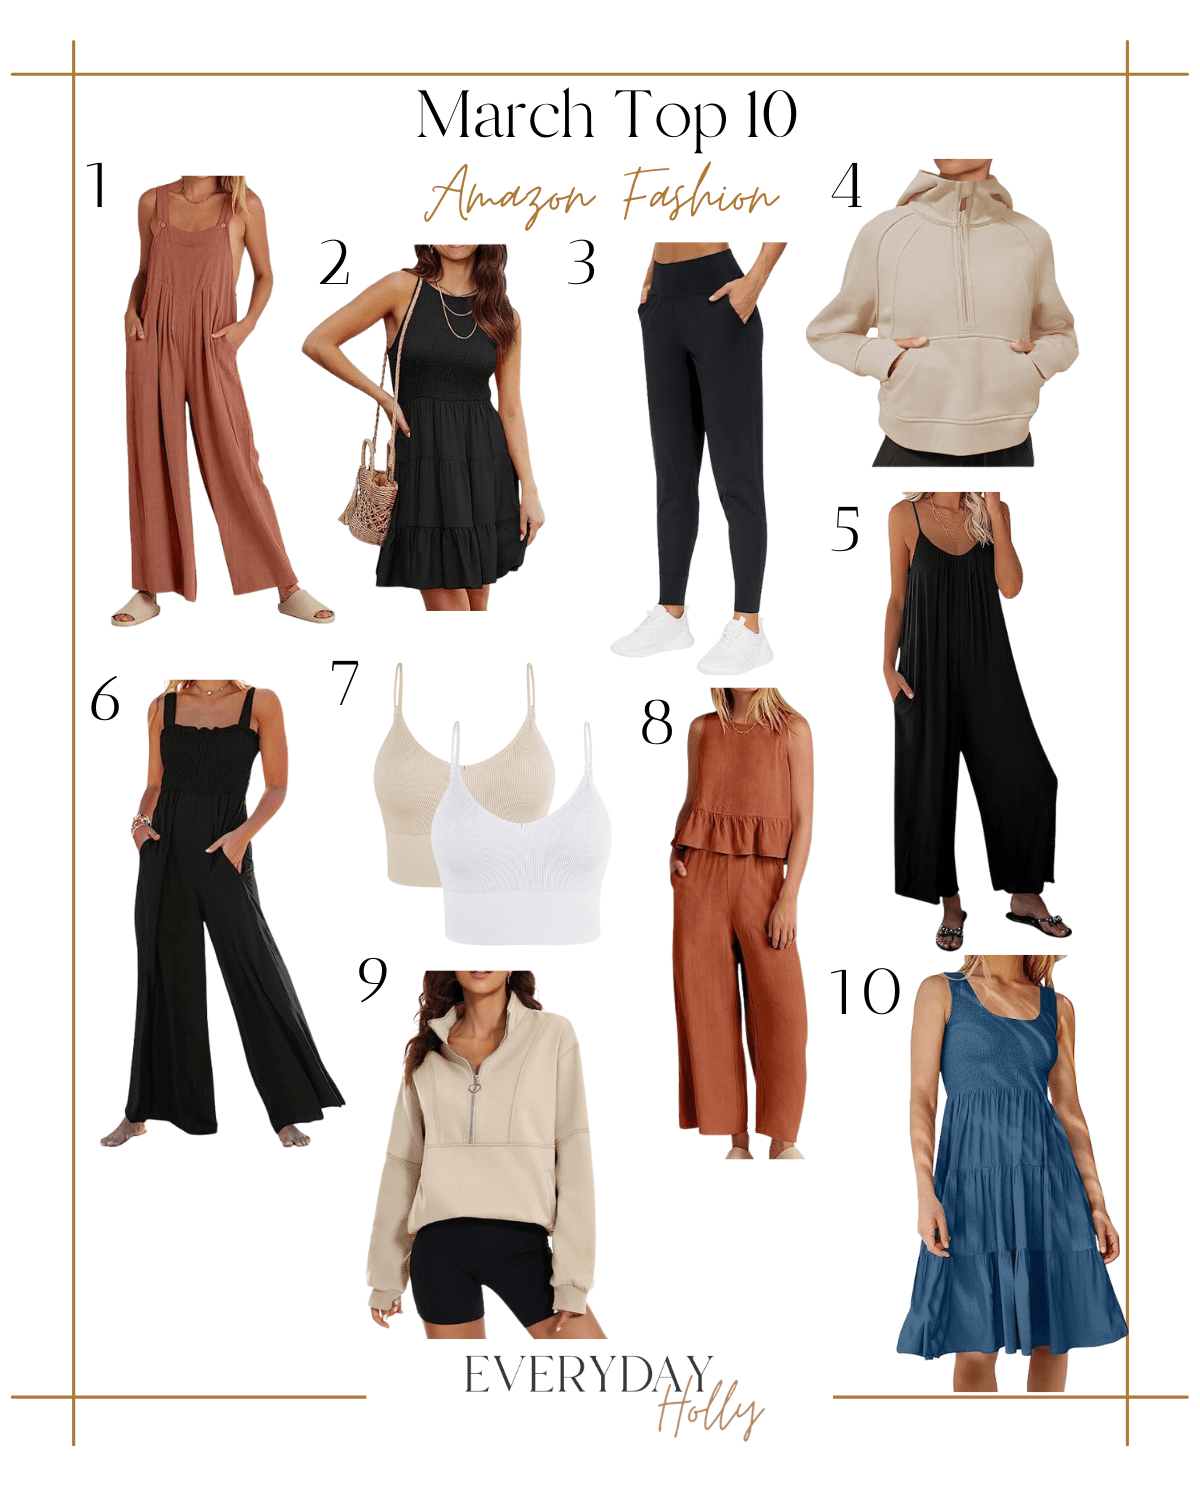 top 10, march top 10, march top sellers, amazon fashion, spring dresses, joggers, pullovers, 2 piece sets, athleisure wear, spring style 